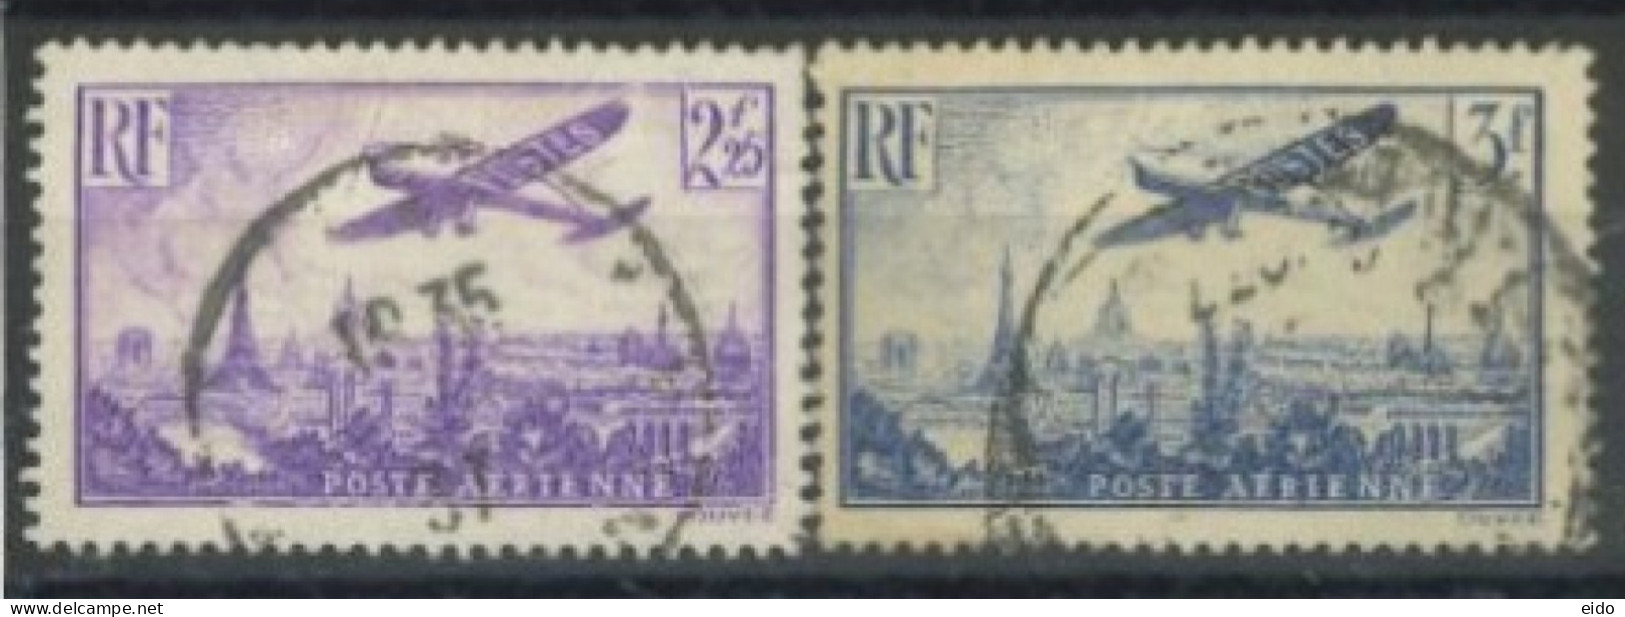 FRANCE - 1936 - PLANE FLYING OVER PARIS STAMPS SET OF 2,  # 10, &12, USED - Used Stamps